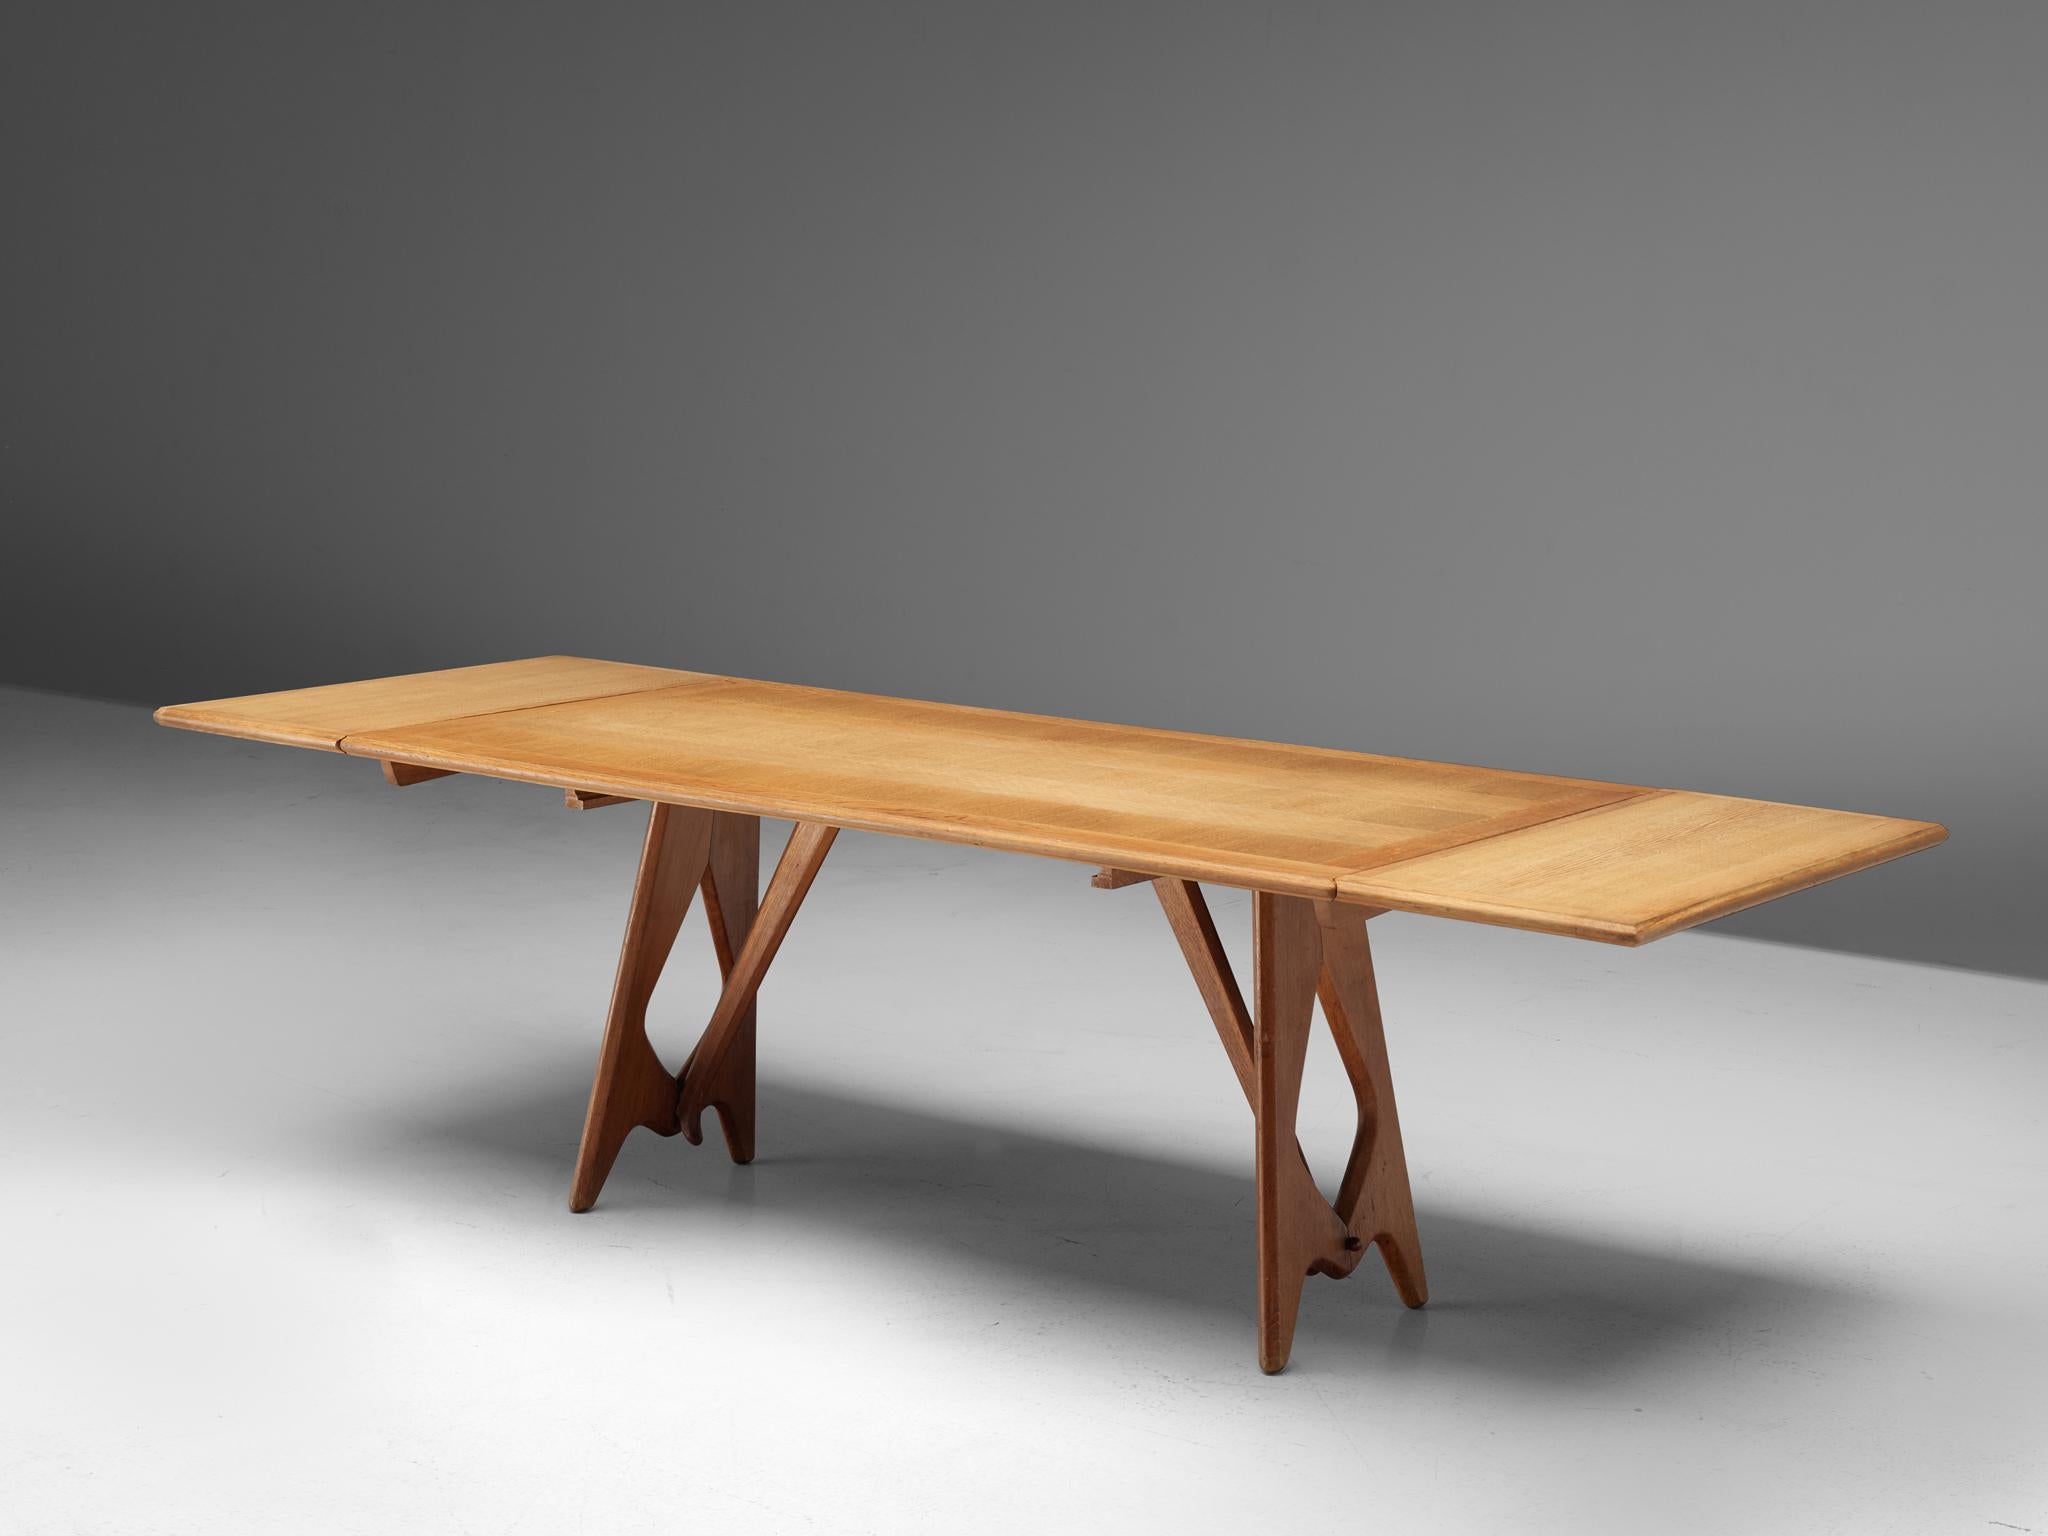 Guillerme et Chambron, dining table, oak, France, 1965.

Extendable dining table by French designer duo Jacques Chambron and Robert Guillerme. The legs of this table are beautifully shaped and show nice organic forms. The top is rectangular with to